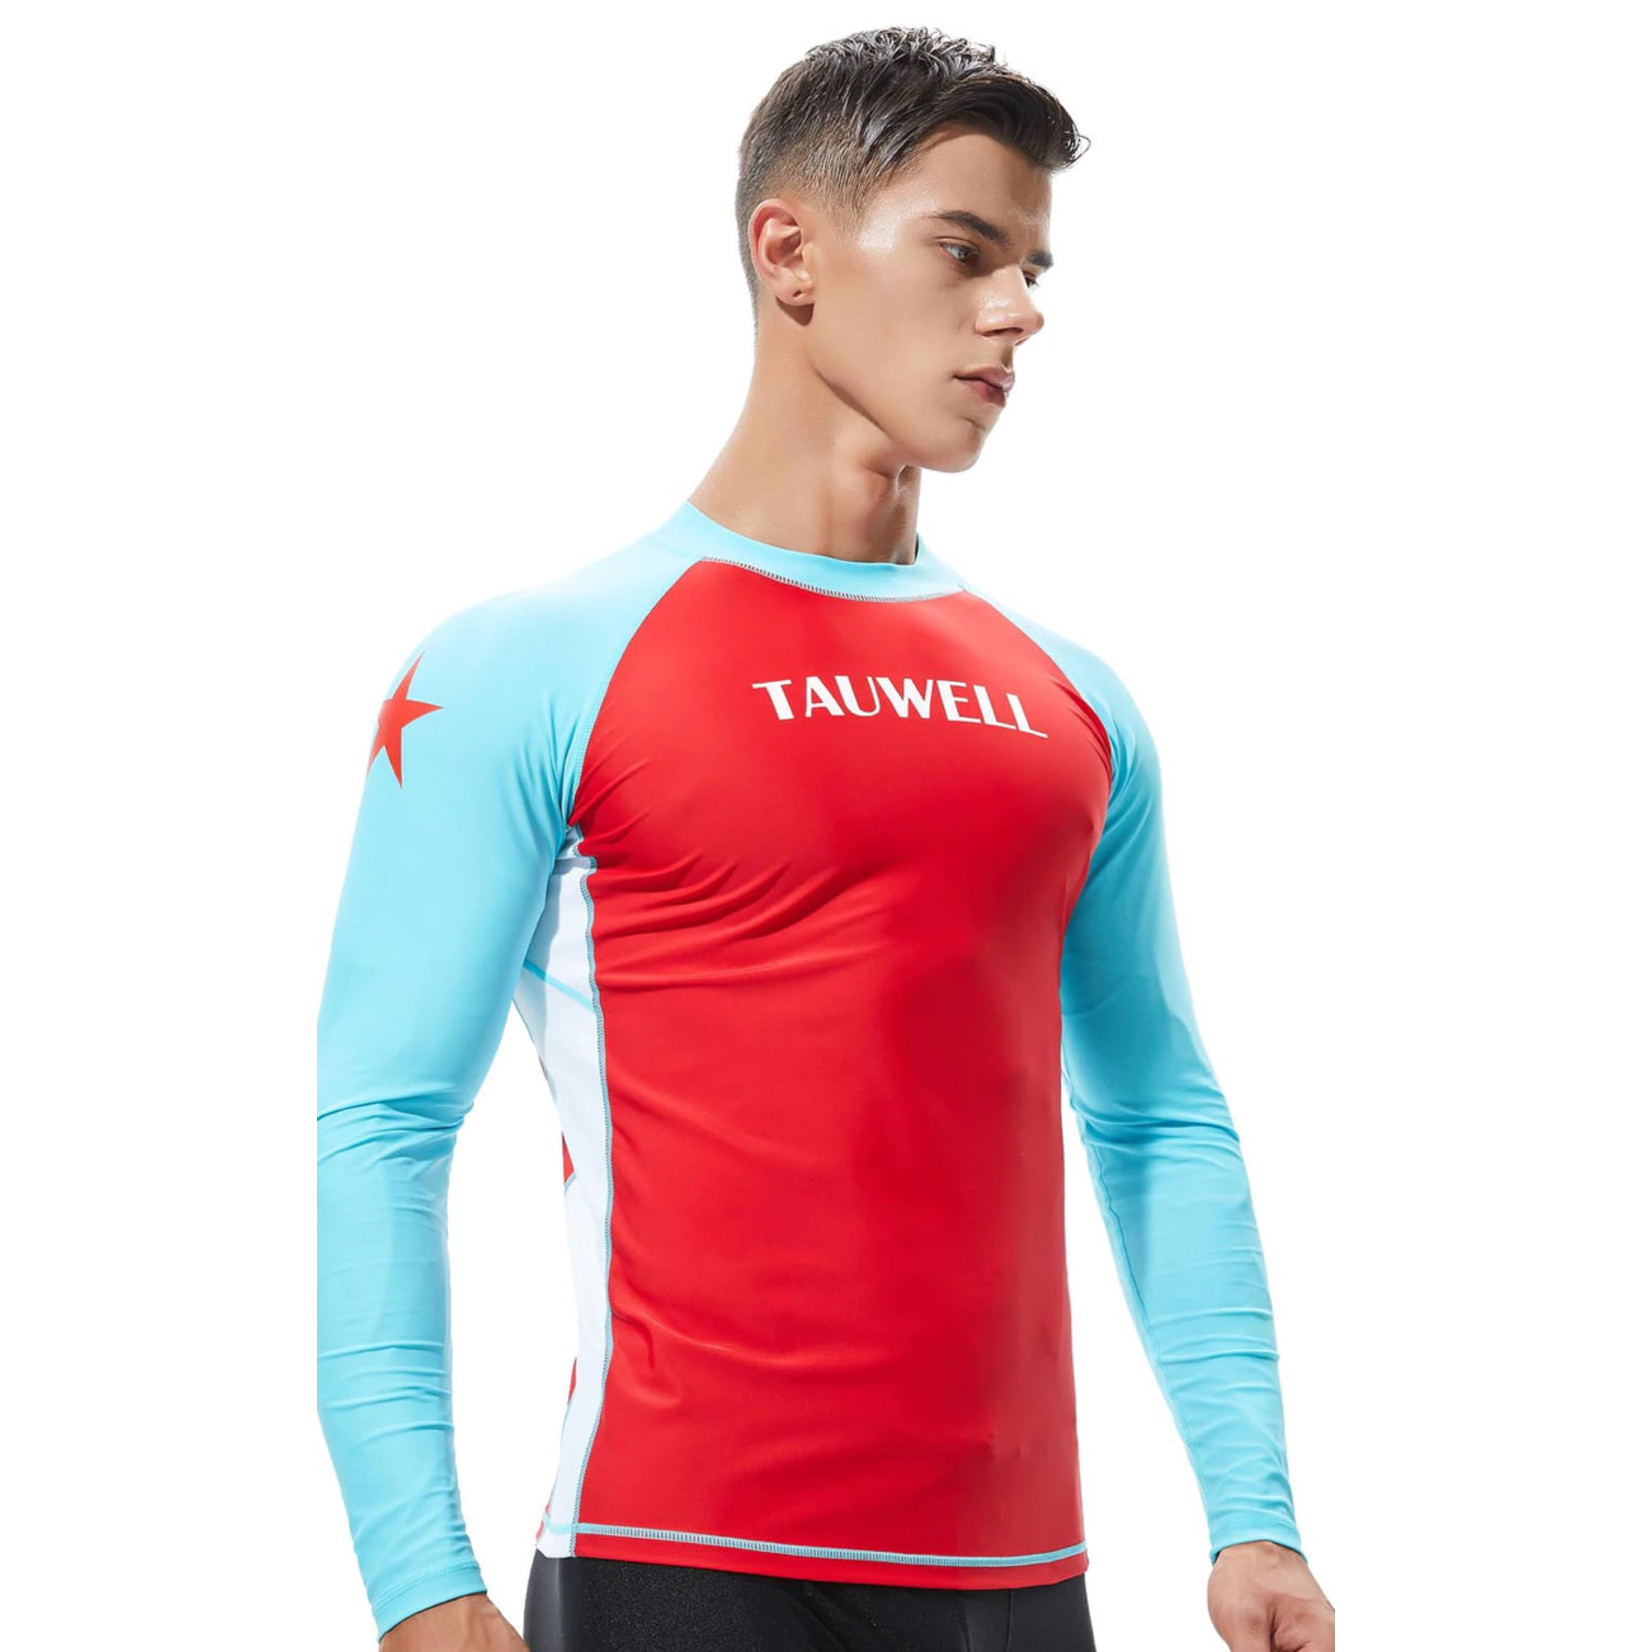 Tauwell TAUWELL Men’s Long Sleeve Rash Guard Surfing Shirt with Star